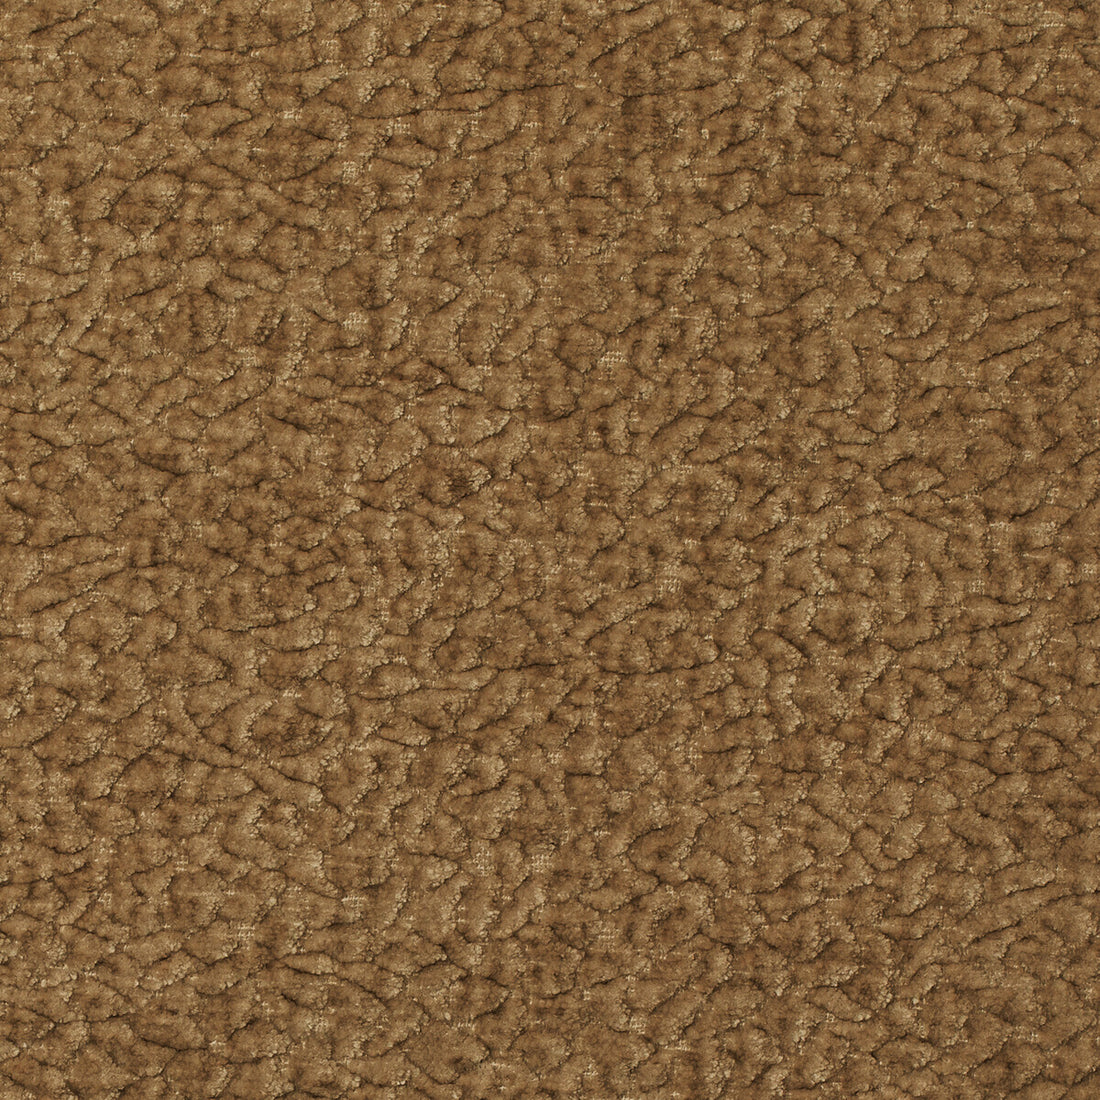 Barton Chenille fabric in pecan color - pattern 36074.4.0 - by Kravet Smart